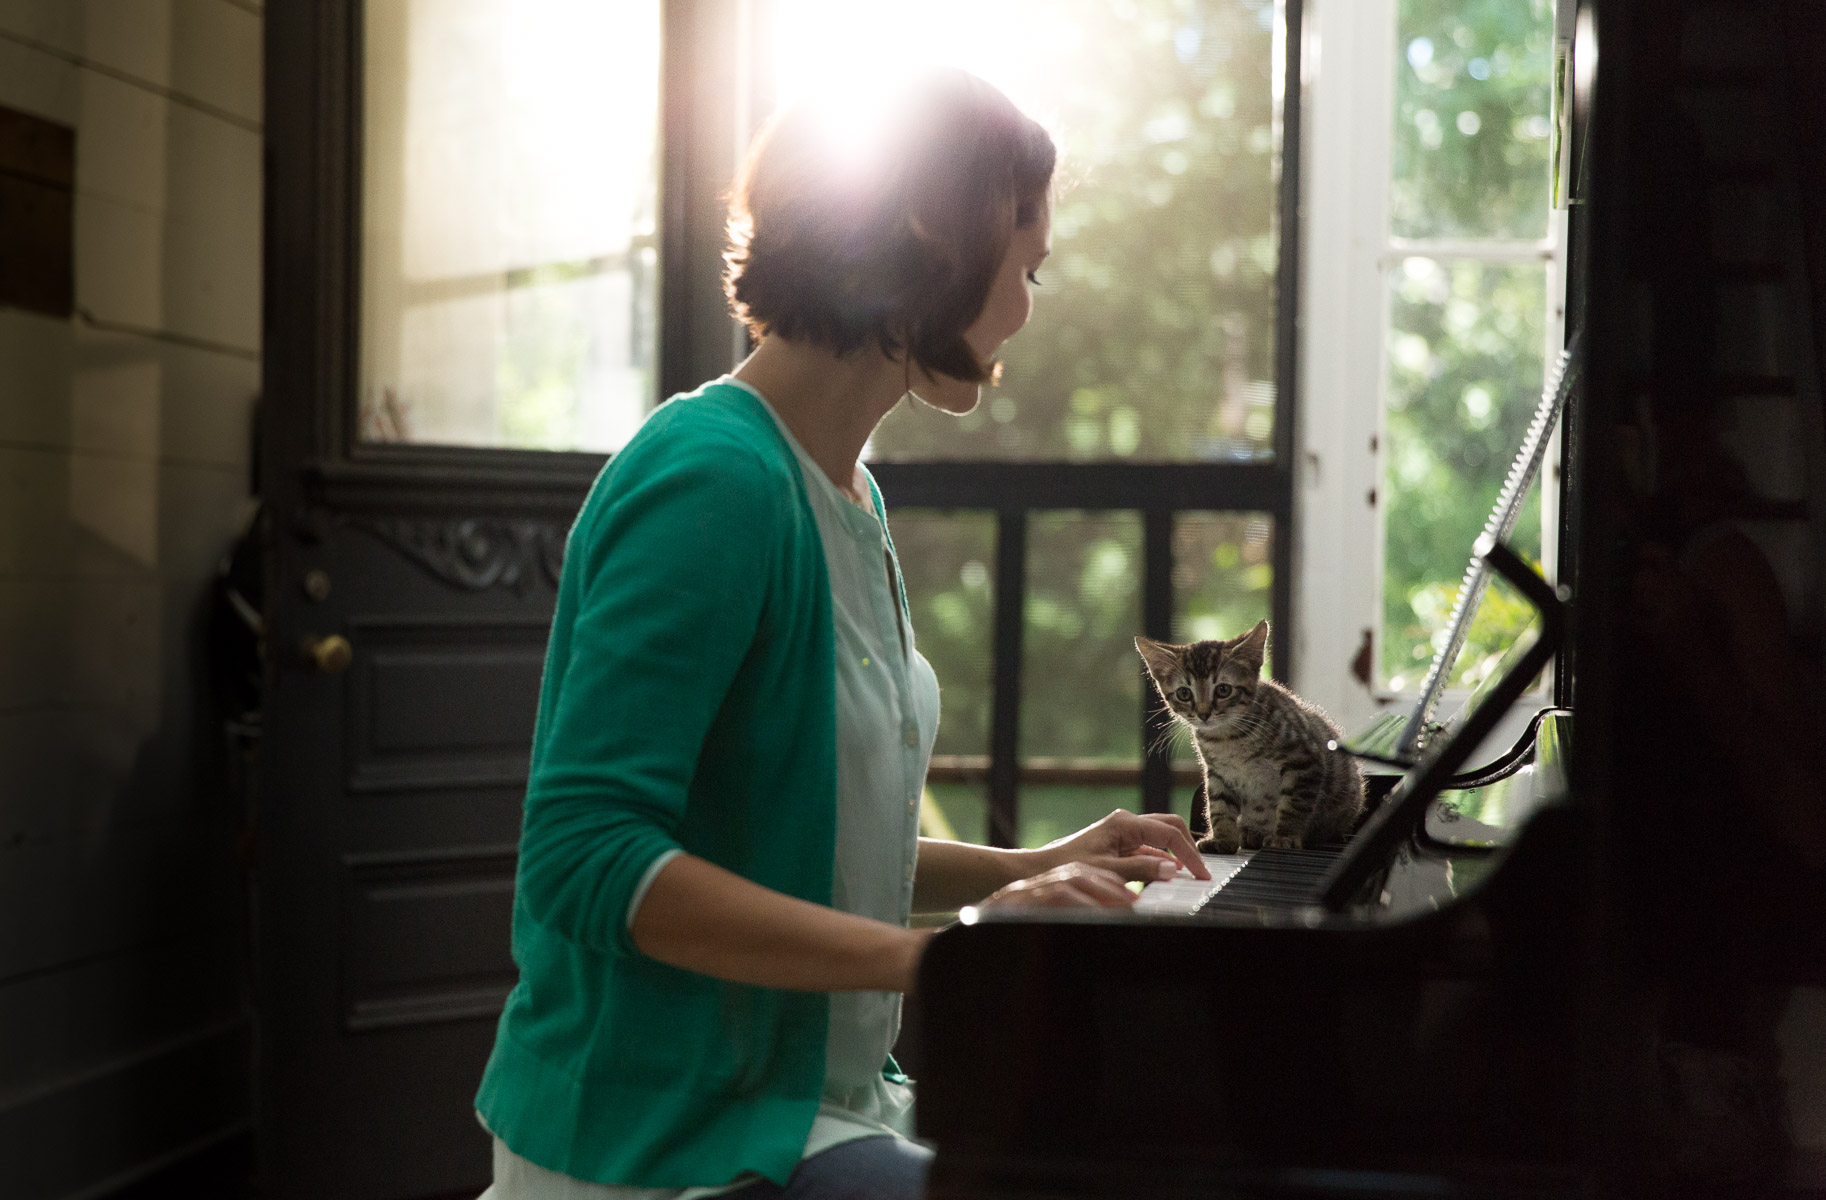 woman-playing-piano-with-cat-on-keyboards-pet-photography.jpg